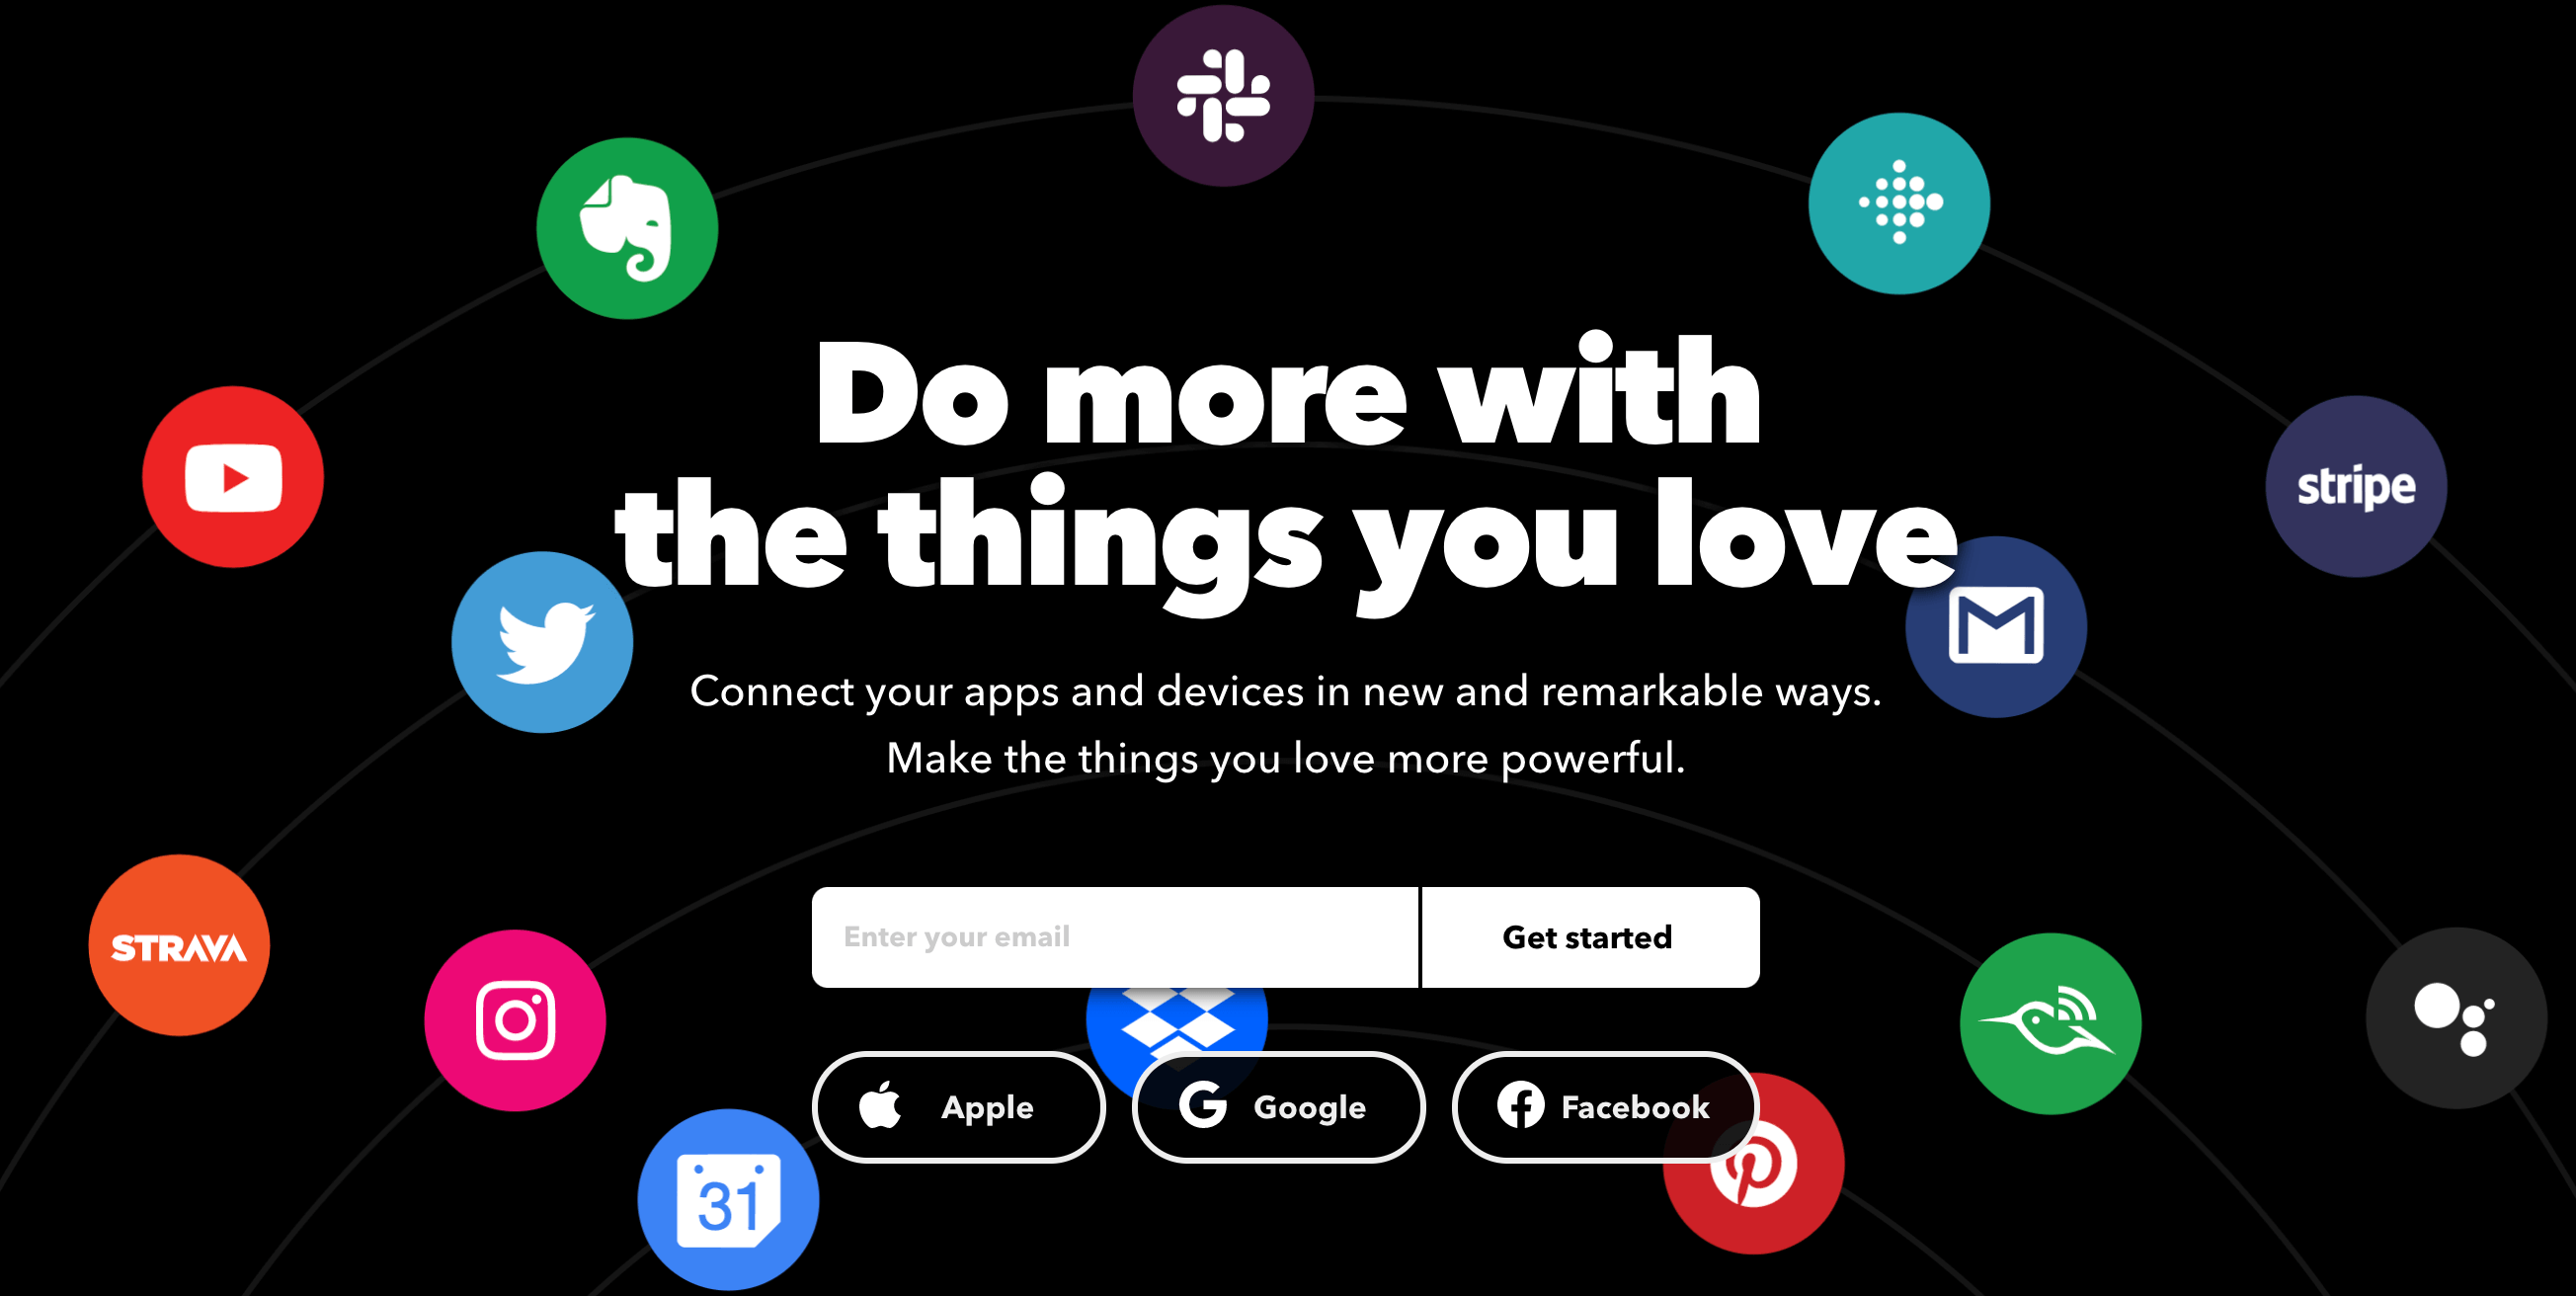 The IFTTT home page.